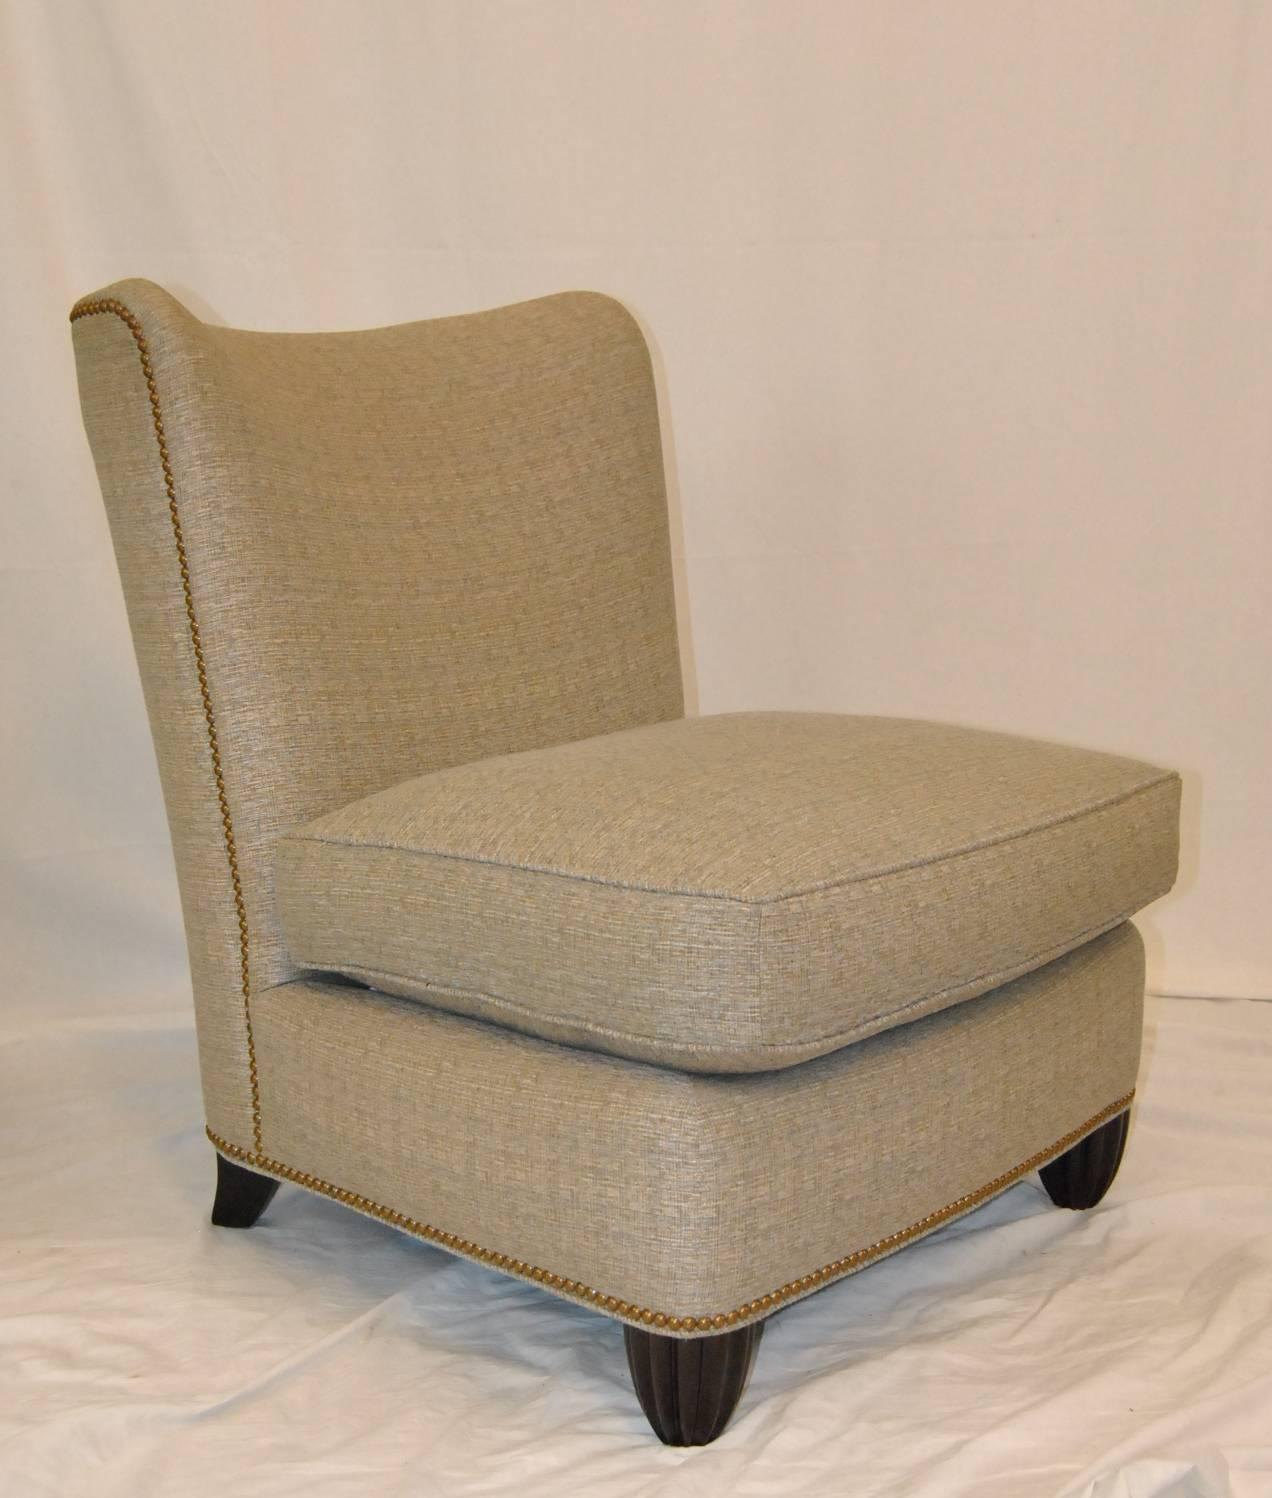 A great pair of armless lounge chairs designed by Barbara Barry for Baker Furniture. Chairs are upholstered in a neutral multi-color fabric which is accented with nailhead trim at base and around the sides and back. Bottom cushions are removable.